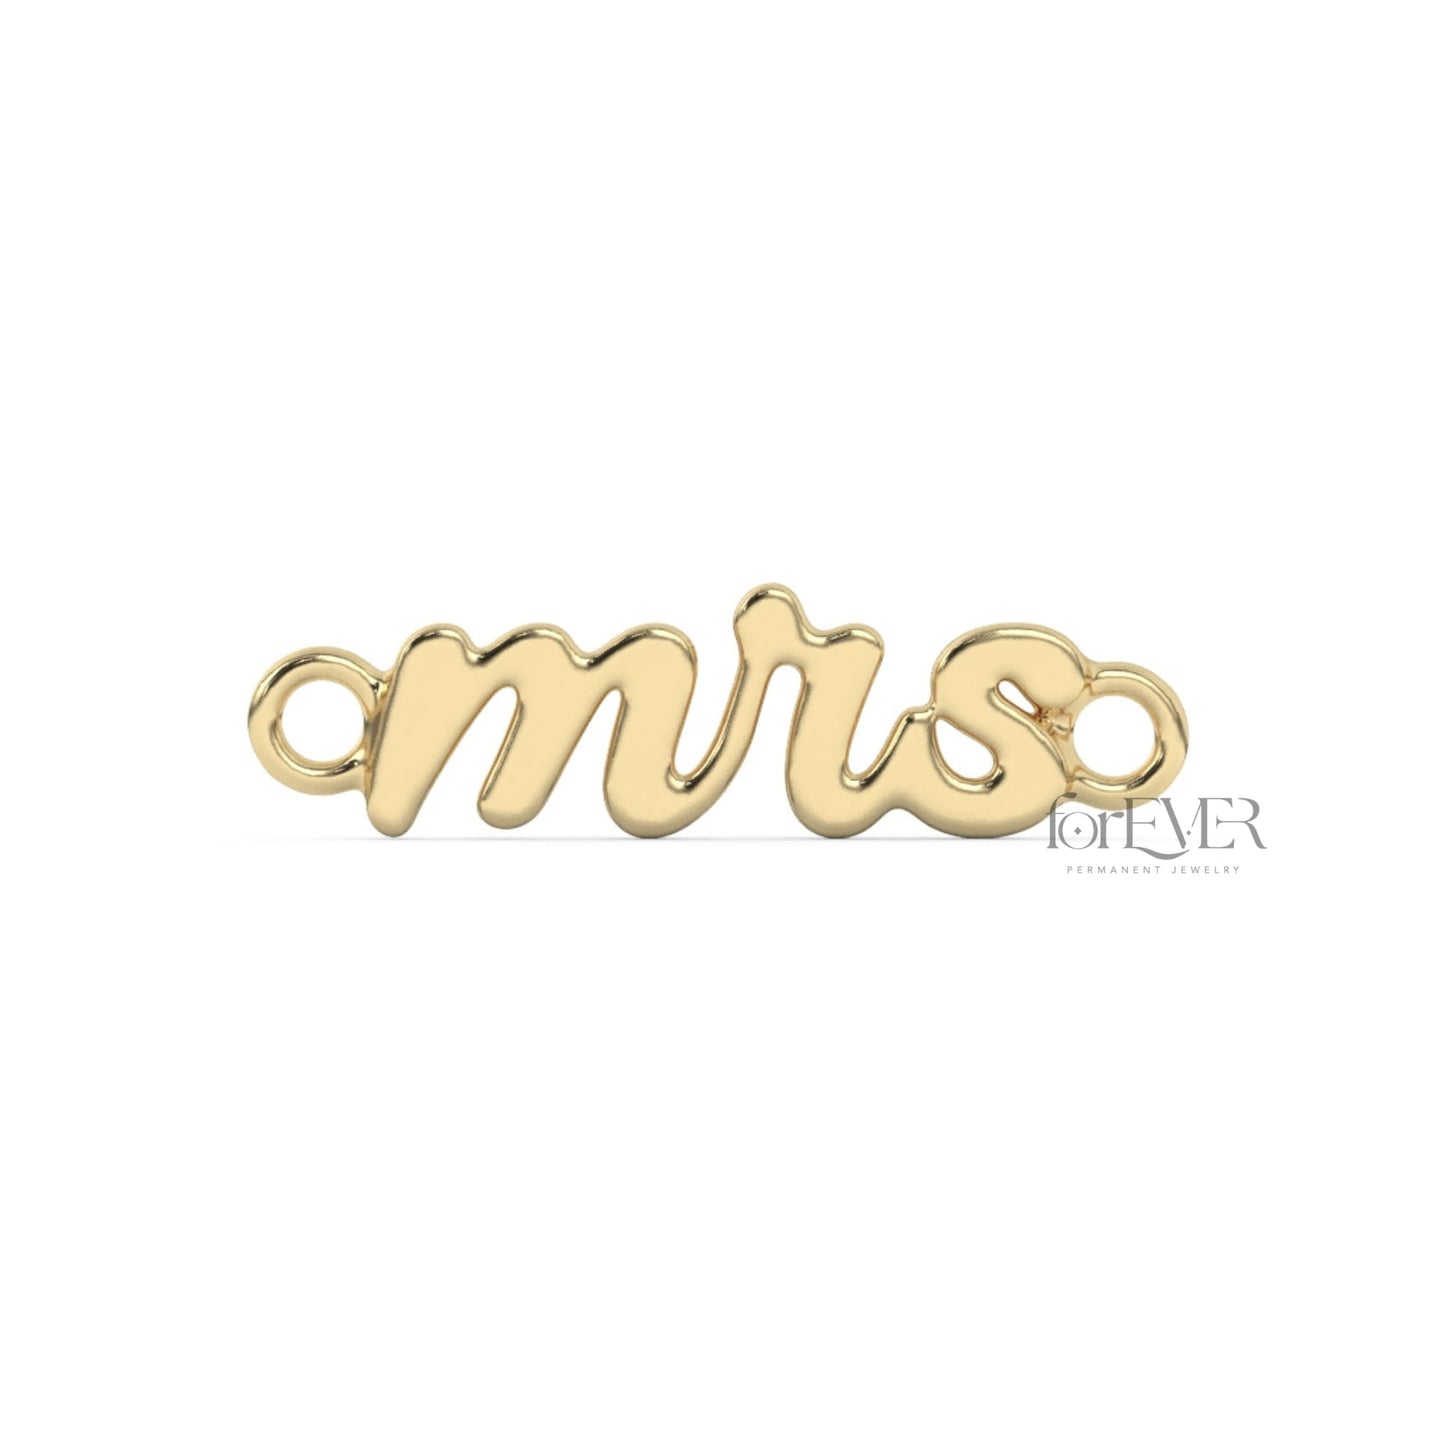 10k Solid Gold "Mrs." Connector